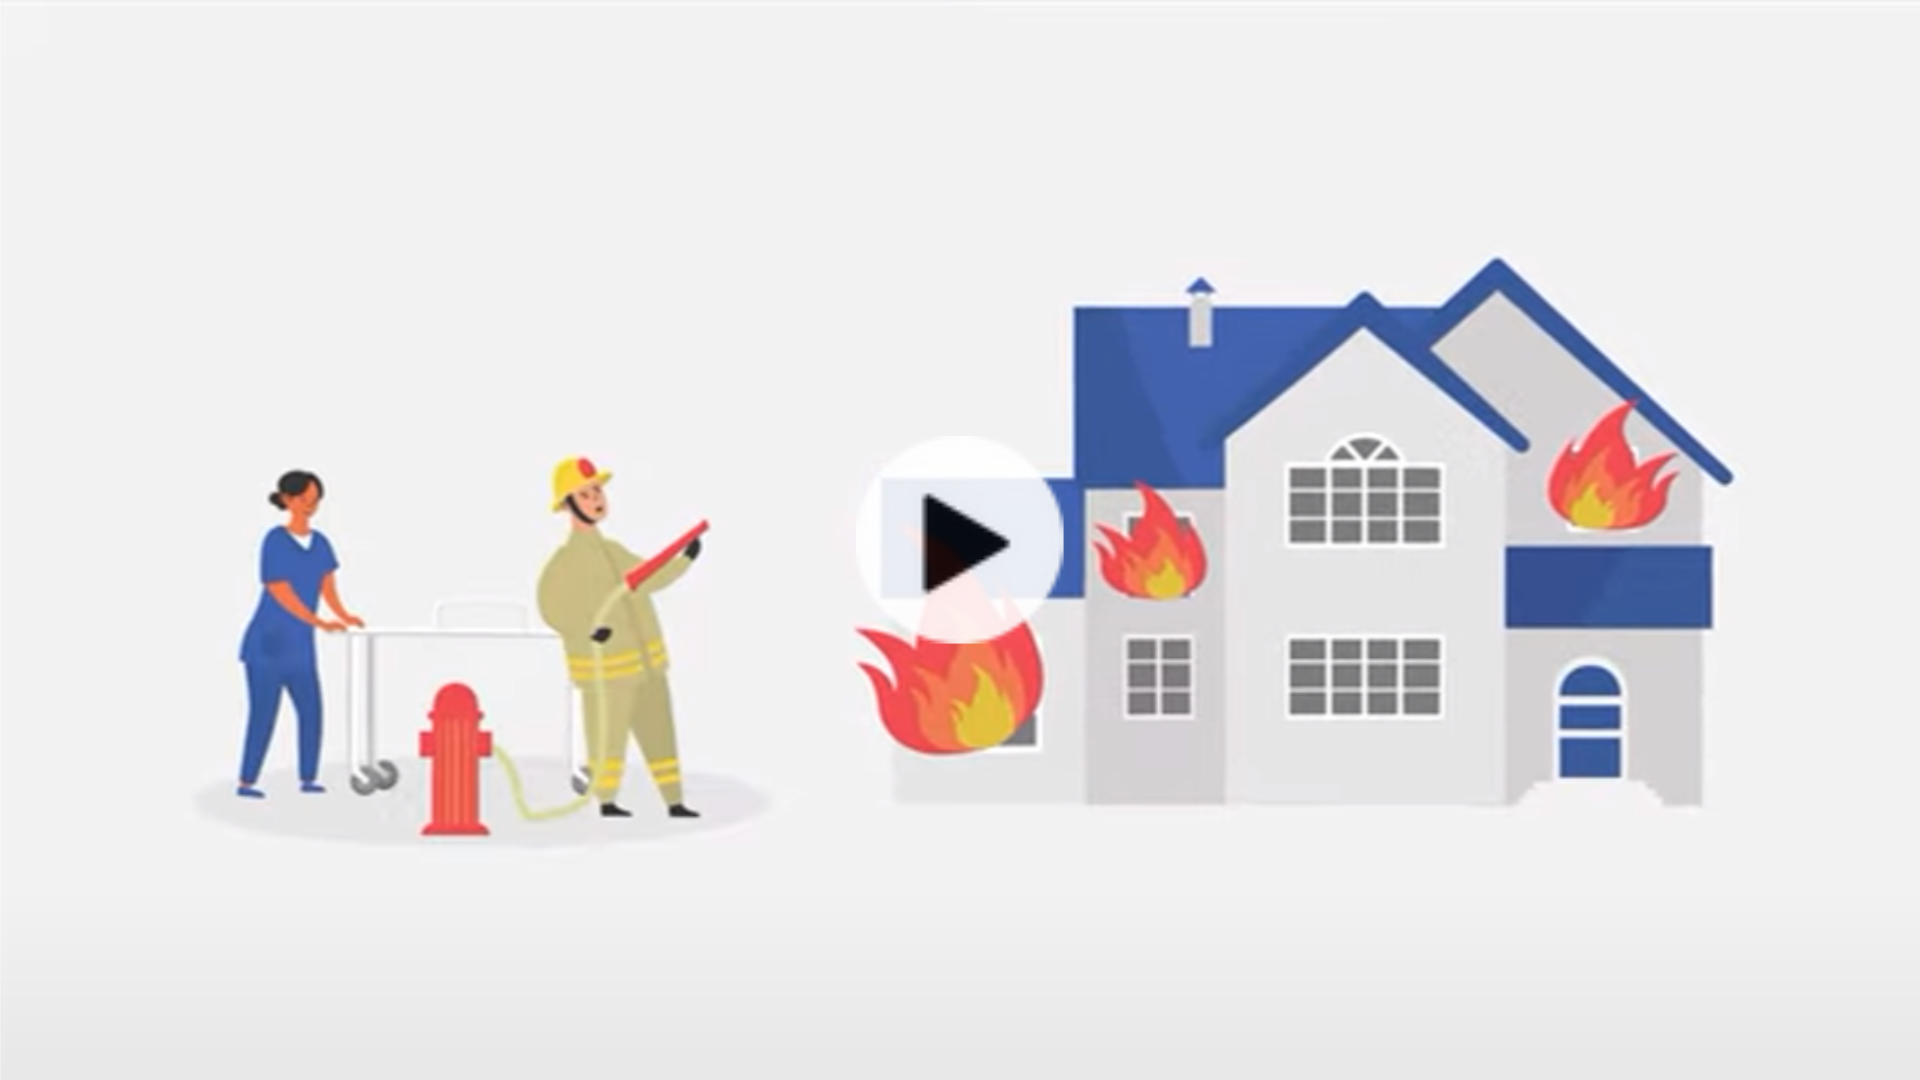 A graphic of a house on fire on the right and a firefighter with a hose on the left standing next to a woman near a fire hydrant.